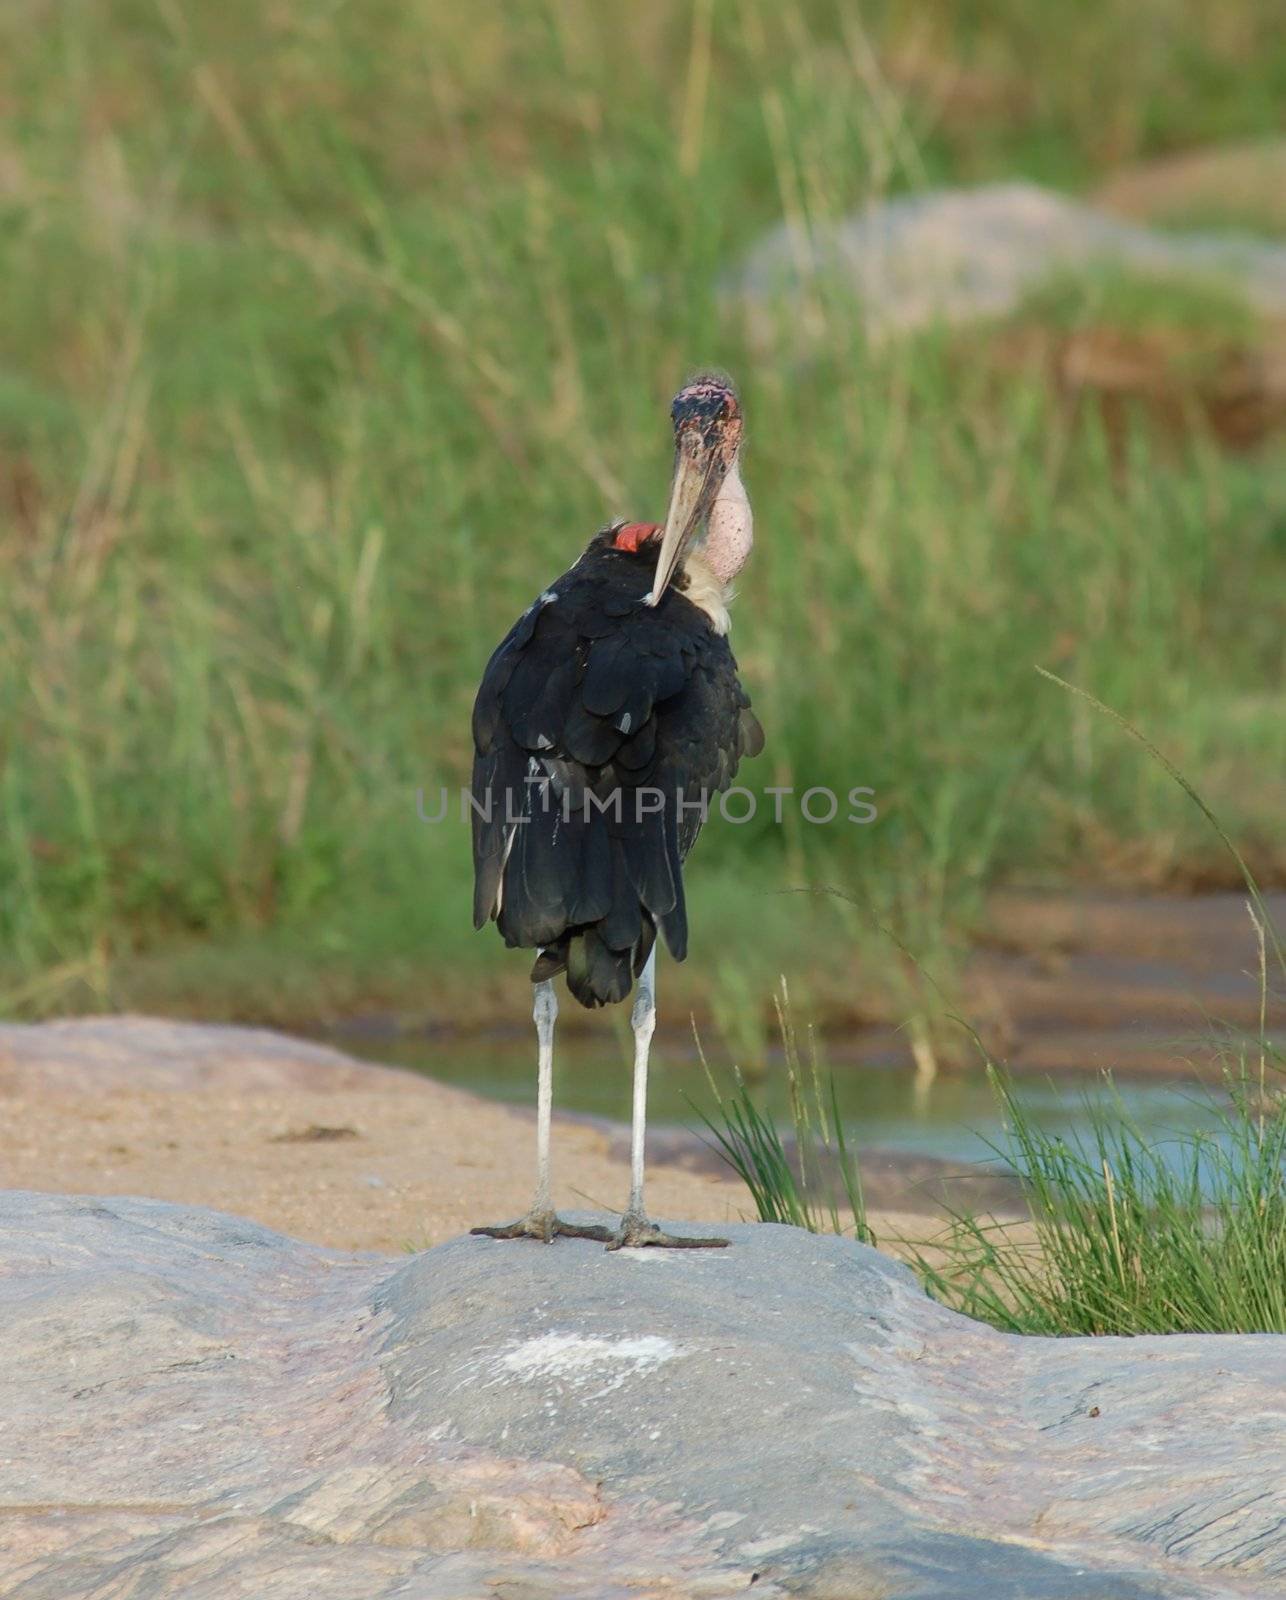 Marabou Stork in South Africa.